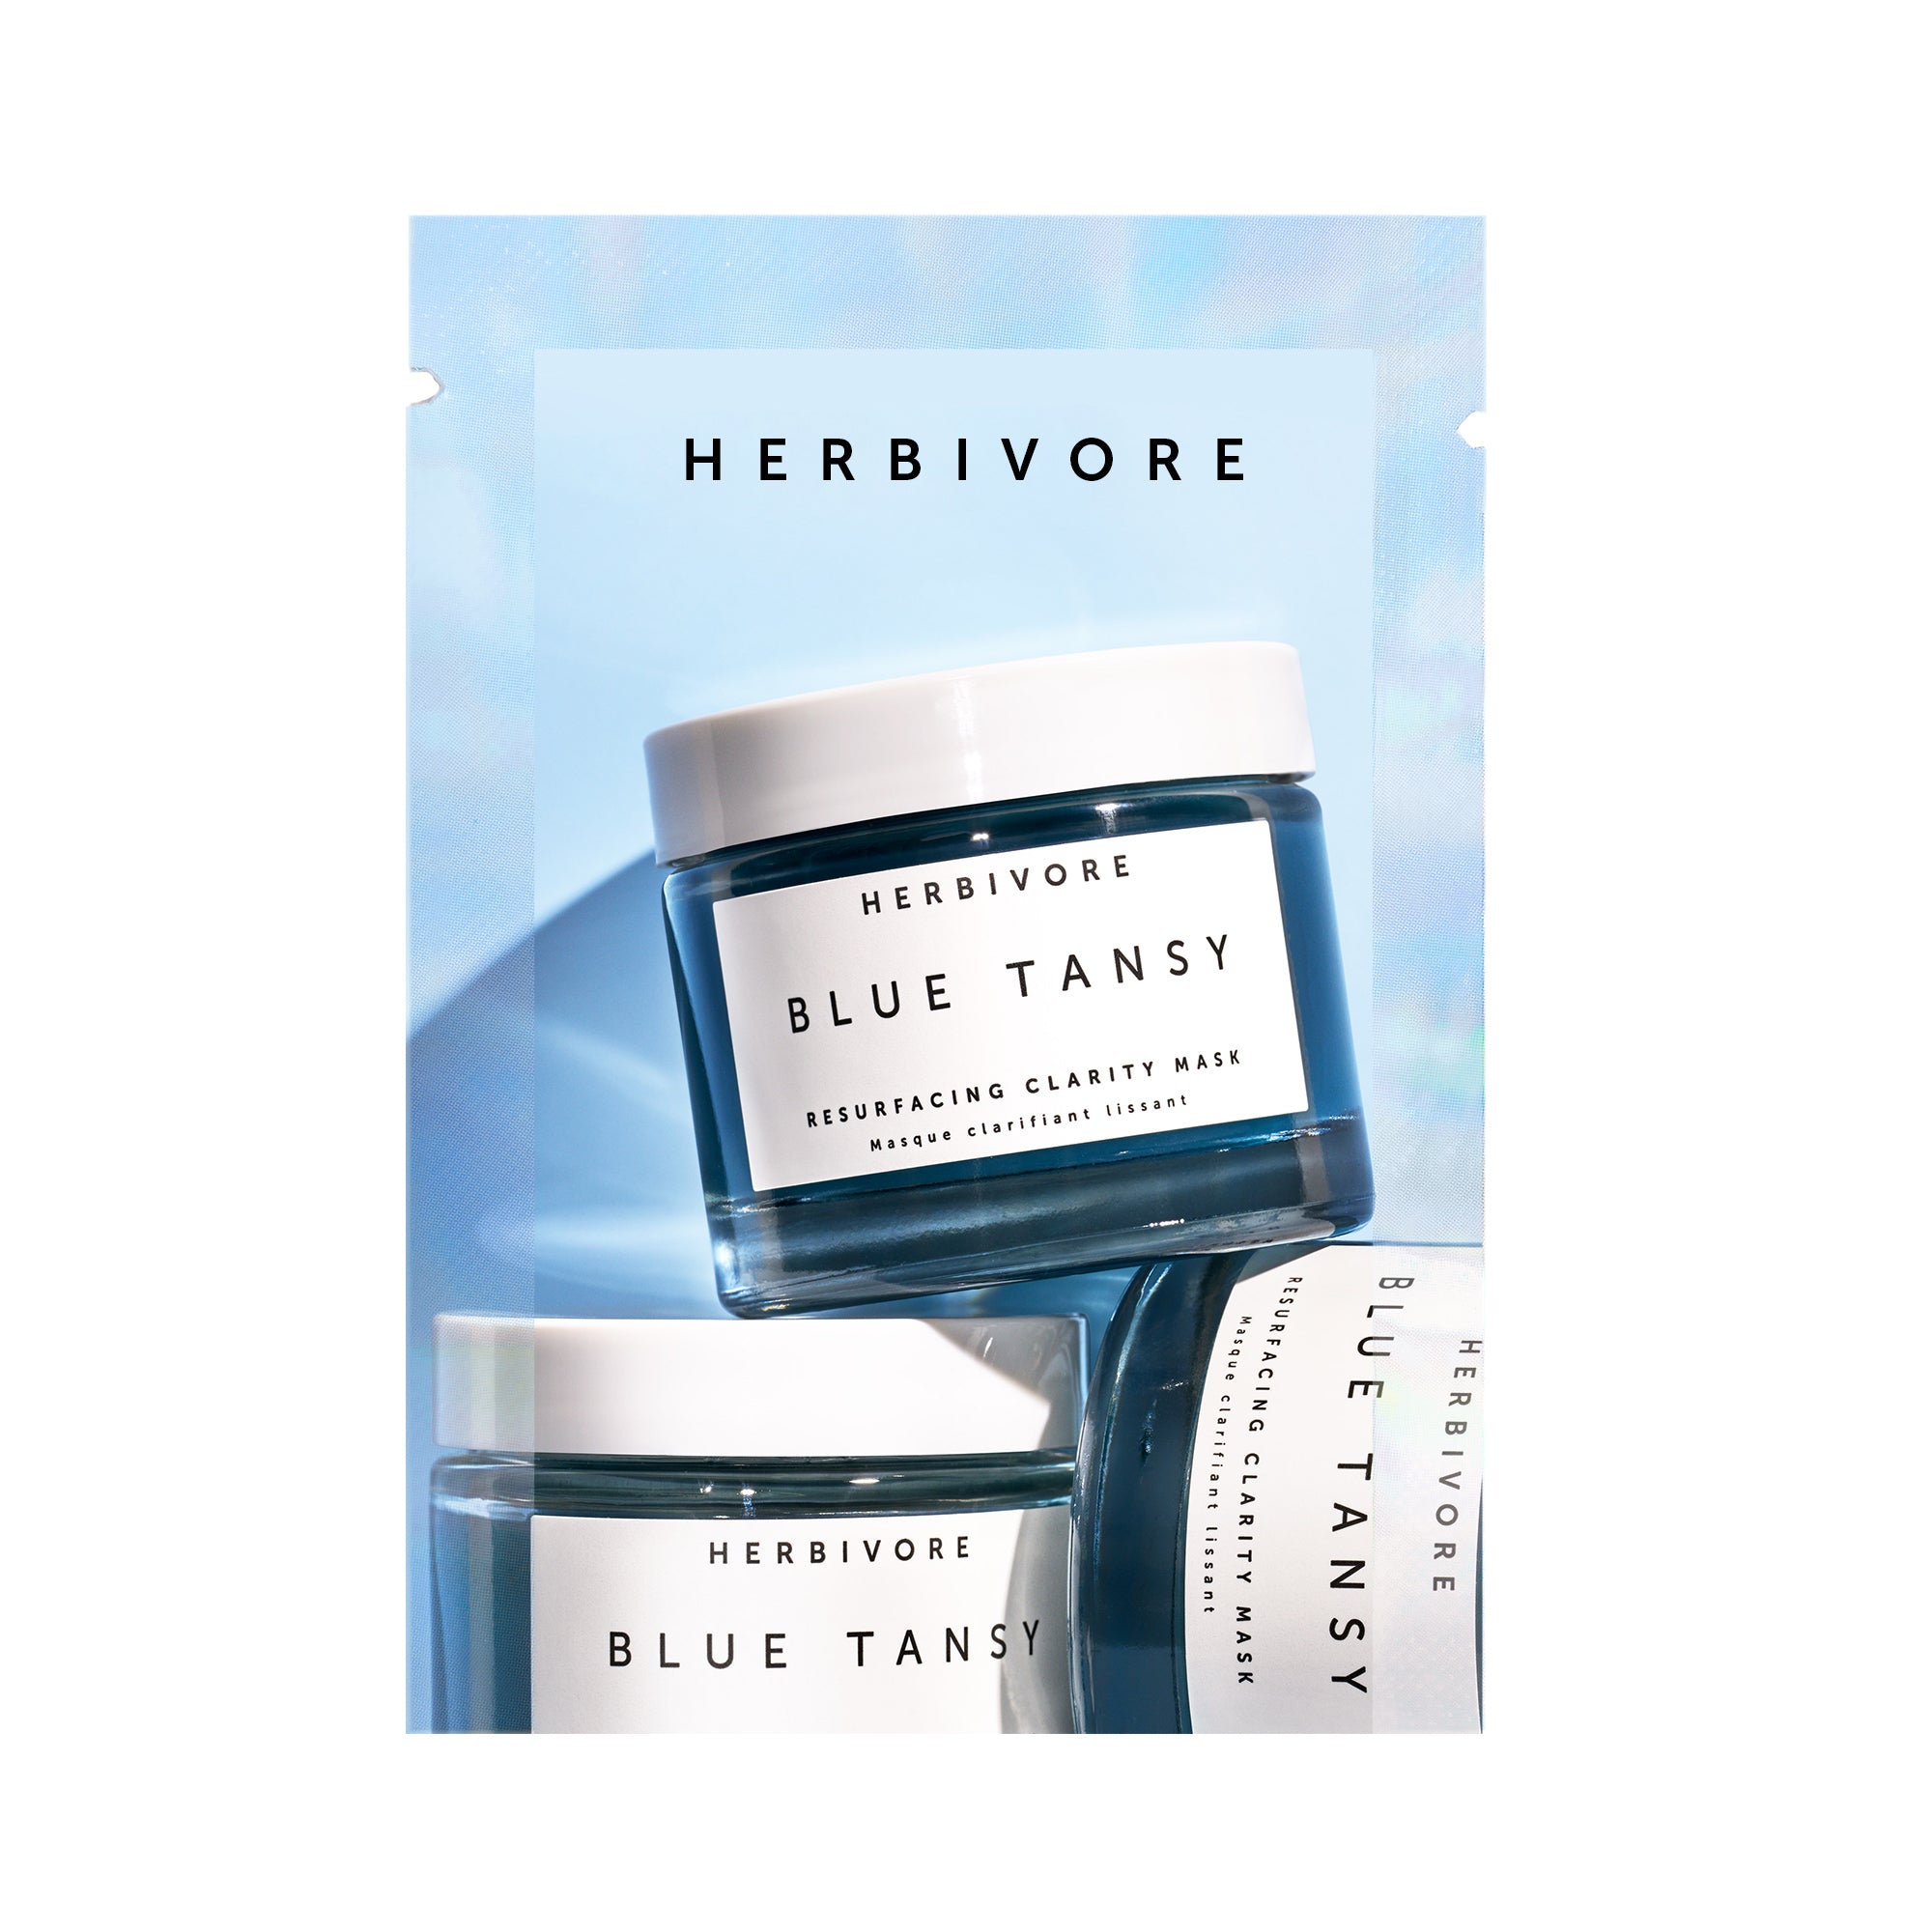 Blue Tansy Resurfacing Clarity Mask Sample Packette